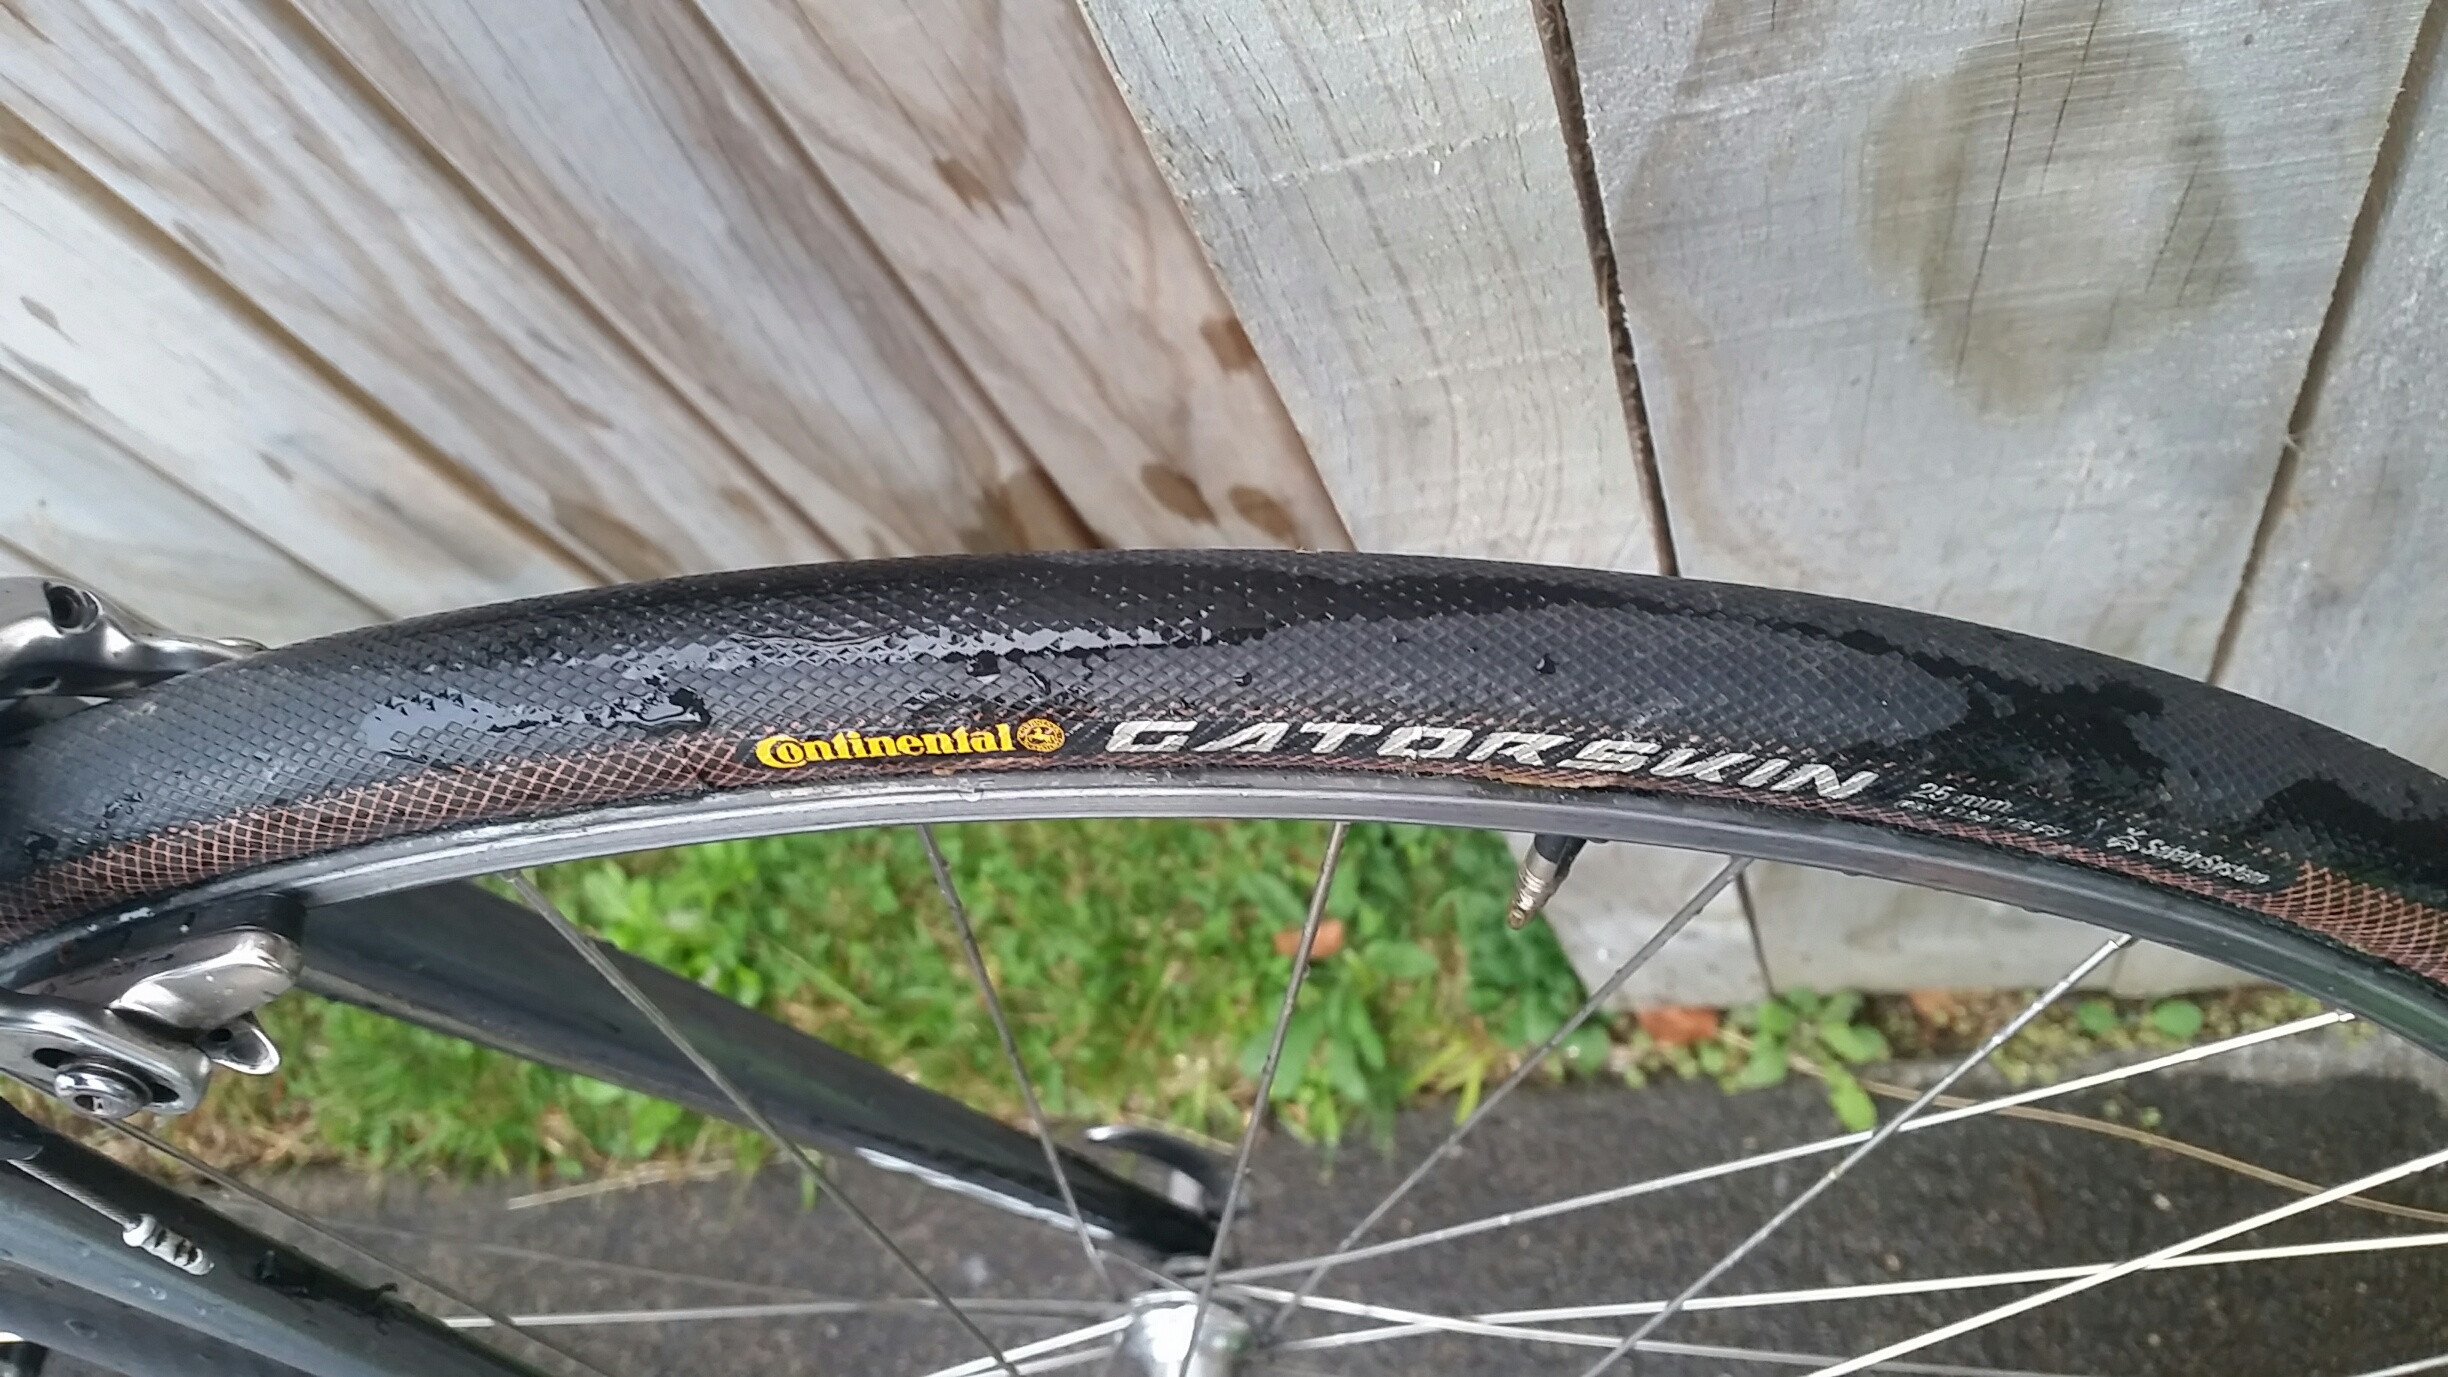 Continental Gatorskin tubular review | The Infinite Lottery of Bike Parts